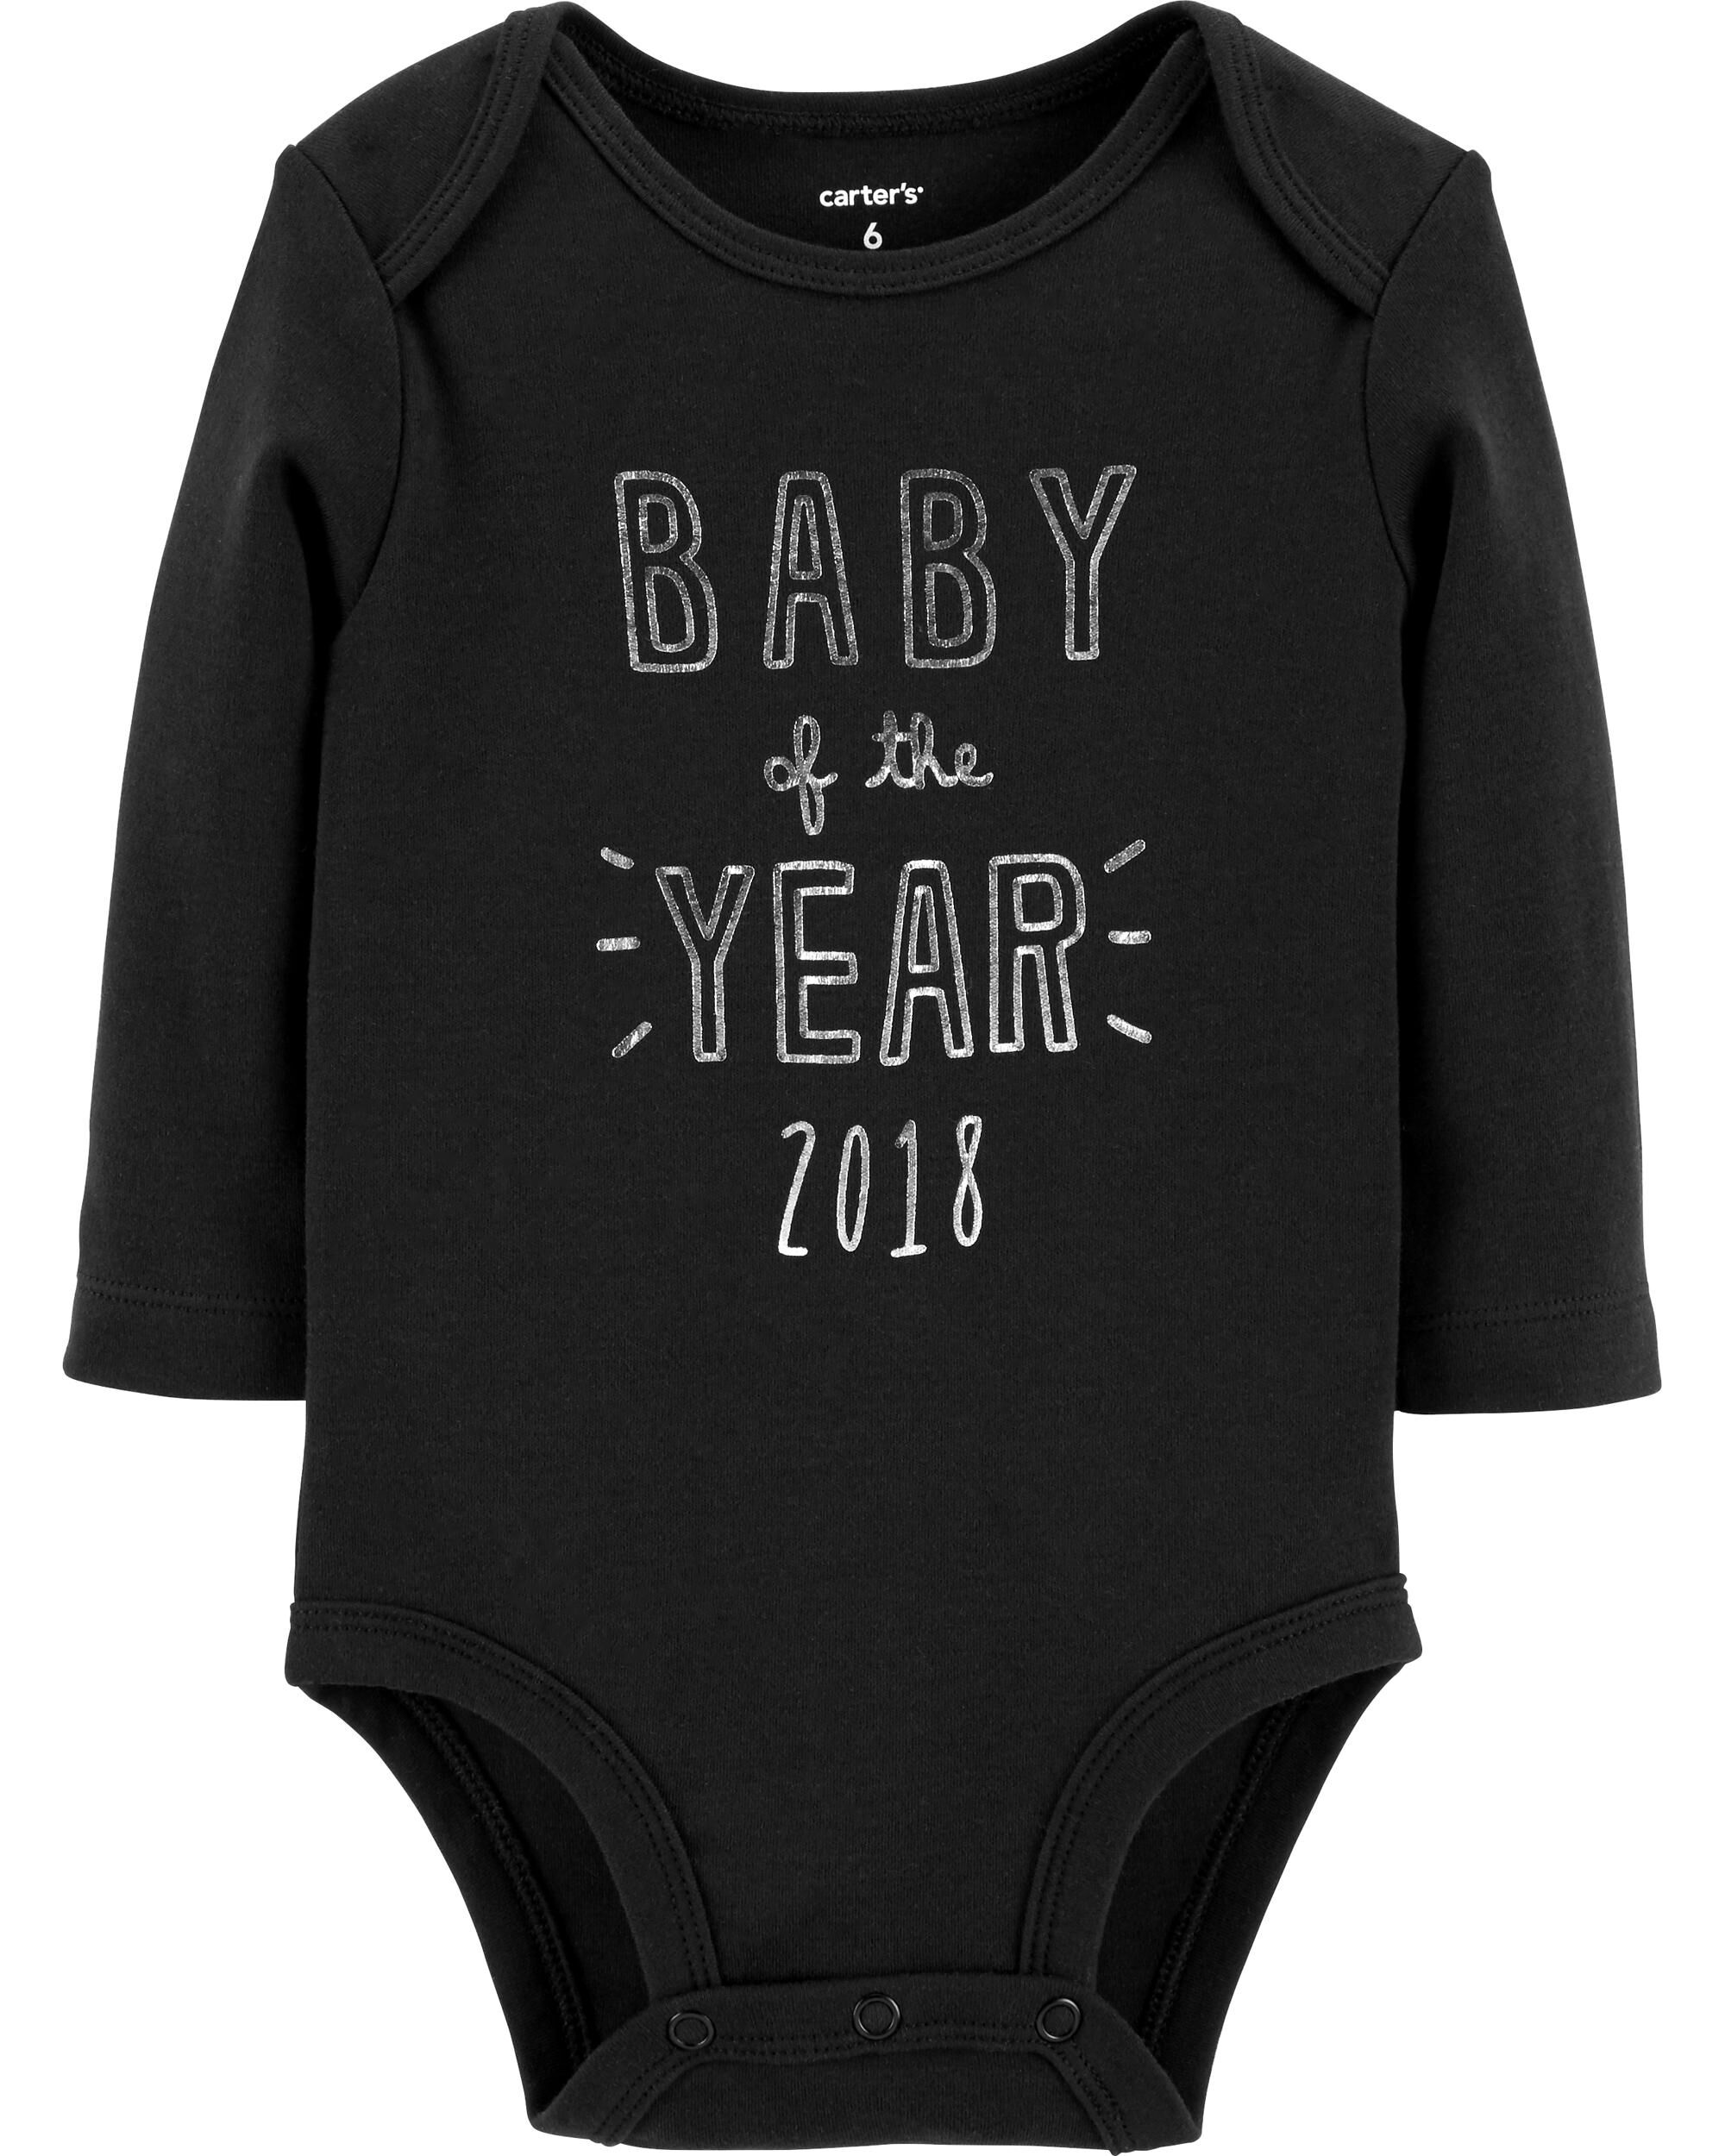 carter's new years outfit